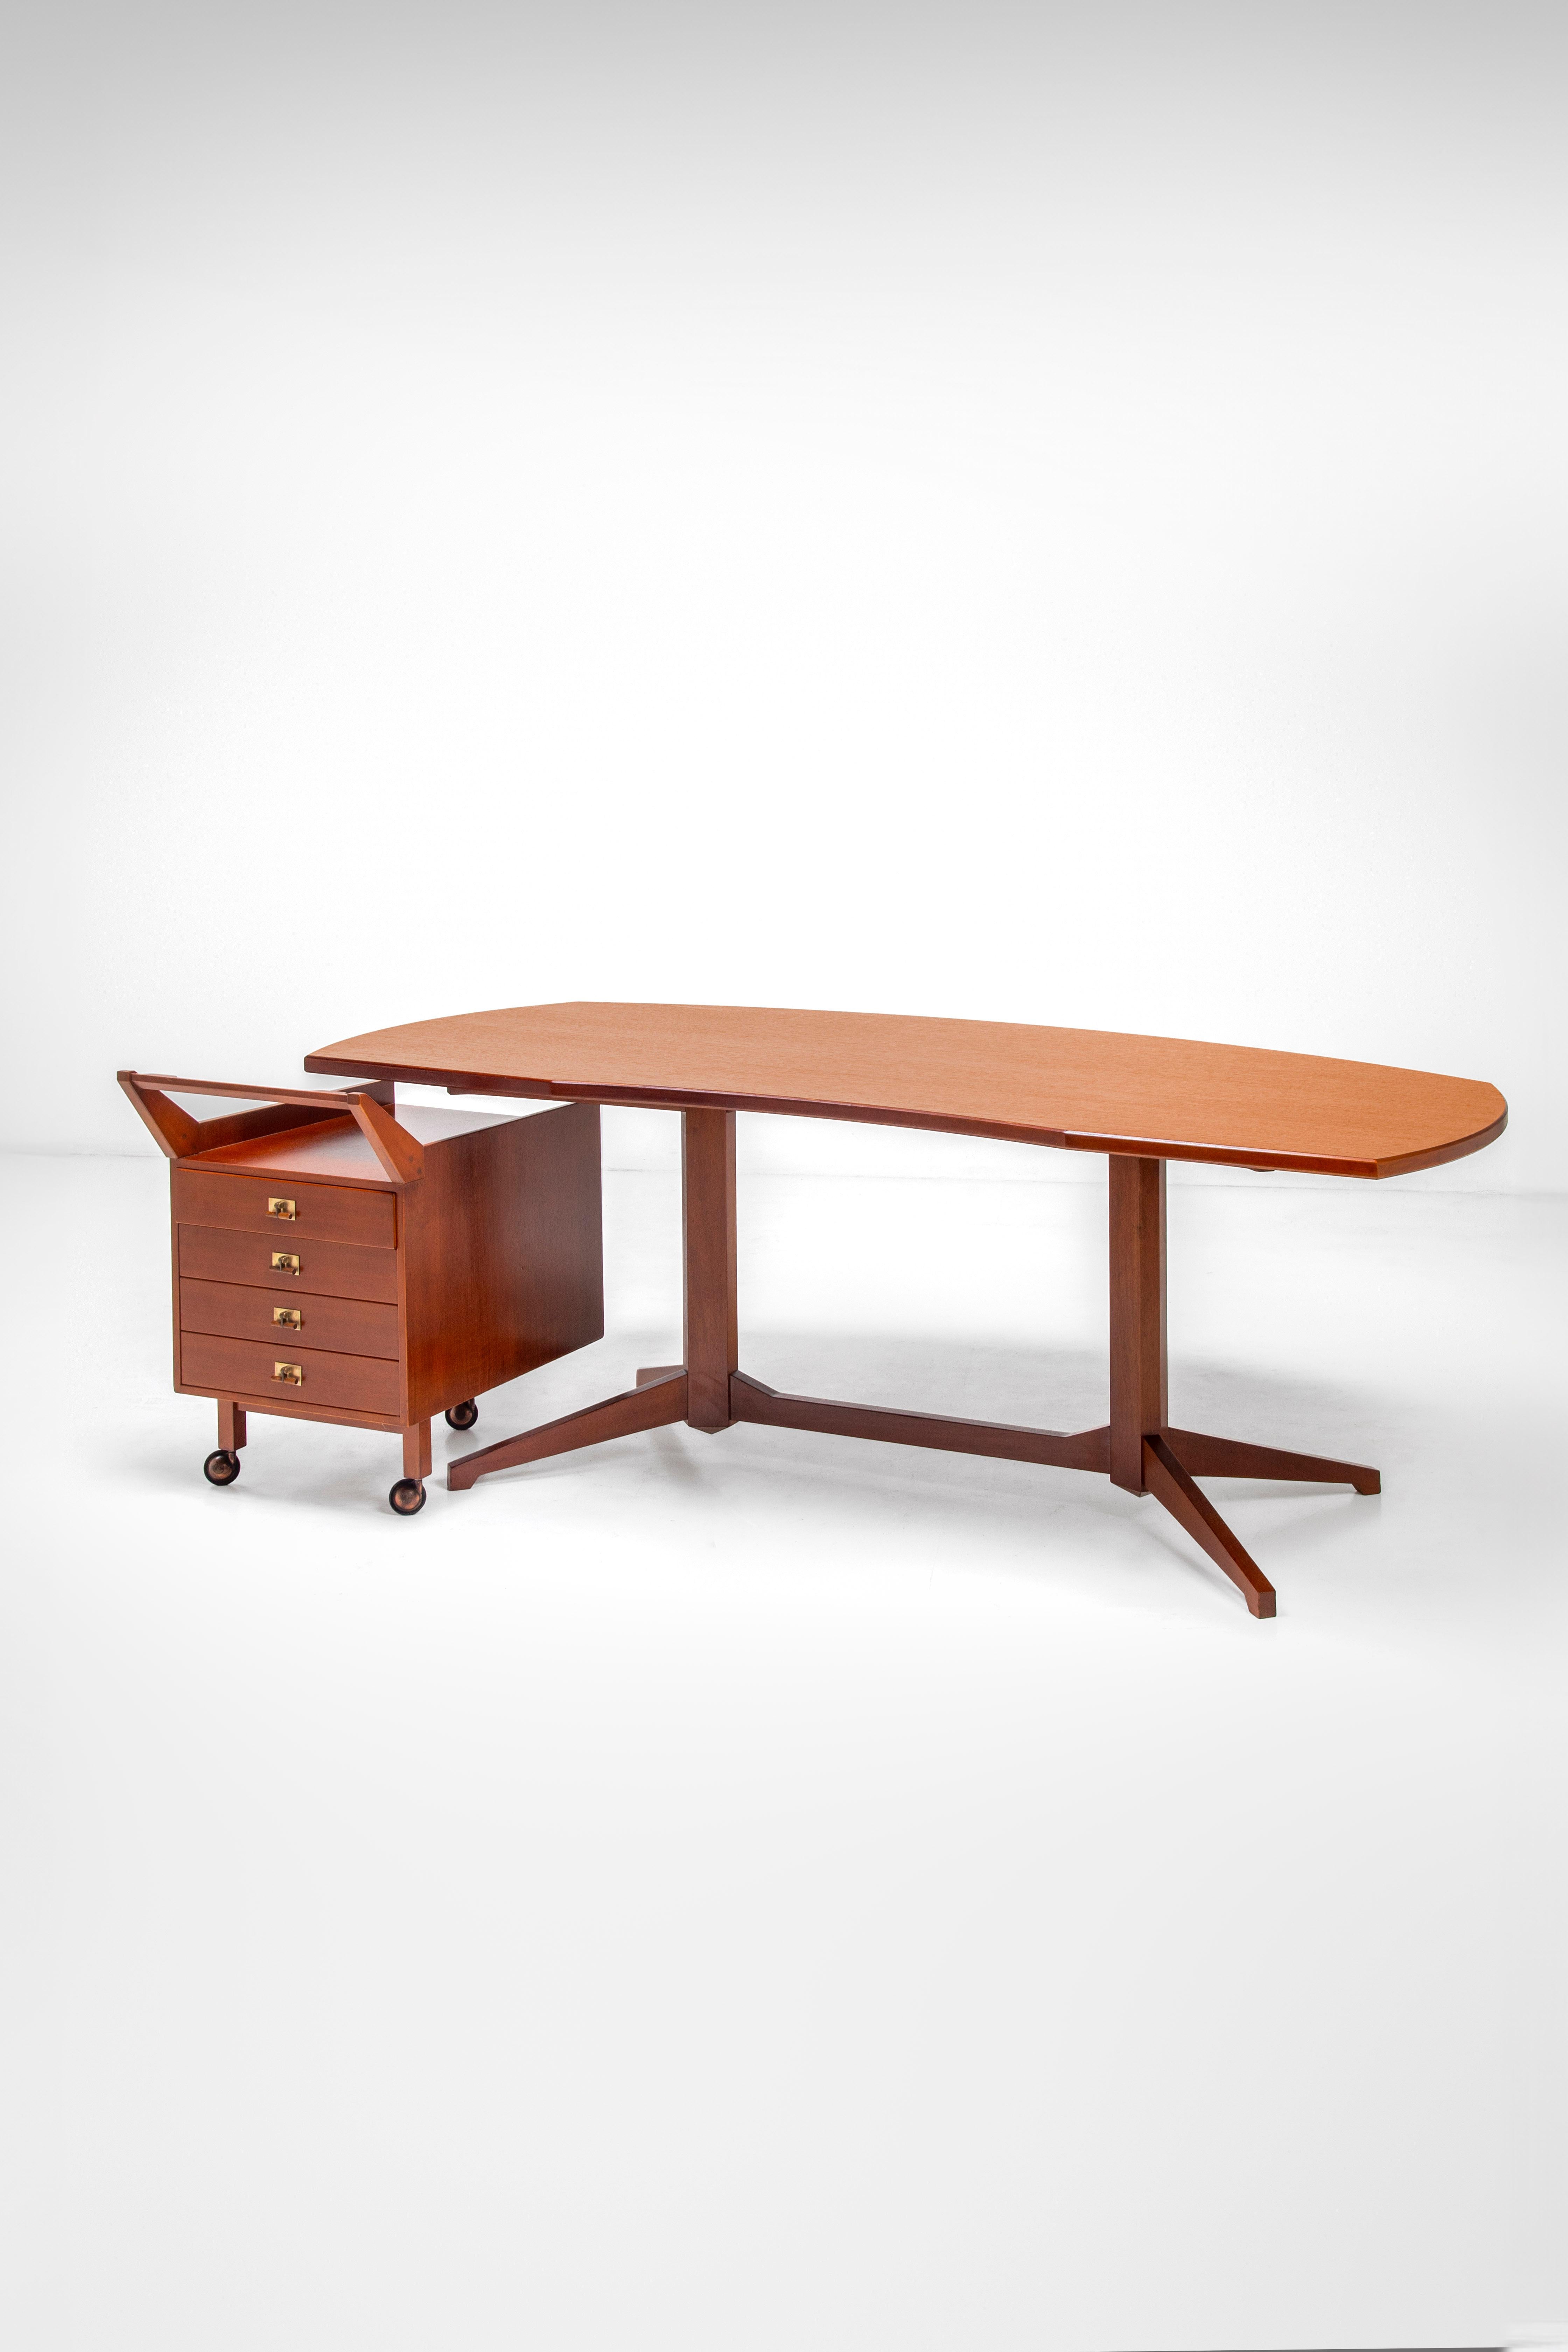 This desk set with movable drawer unit is a classic rationalist design with attention to clean forms and lines by Franco Albini. The desk is functional with a shape that is both ergonomic and decorative. The chest of drawers is an element designed